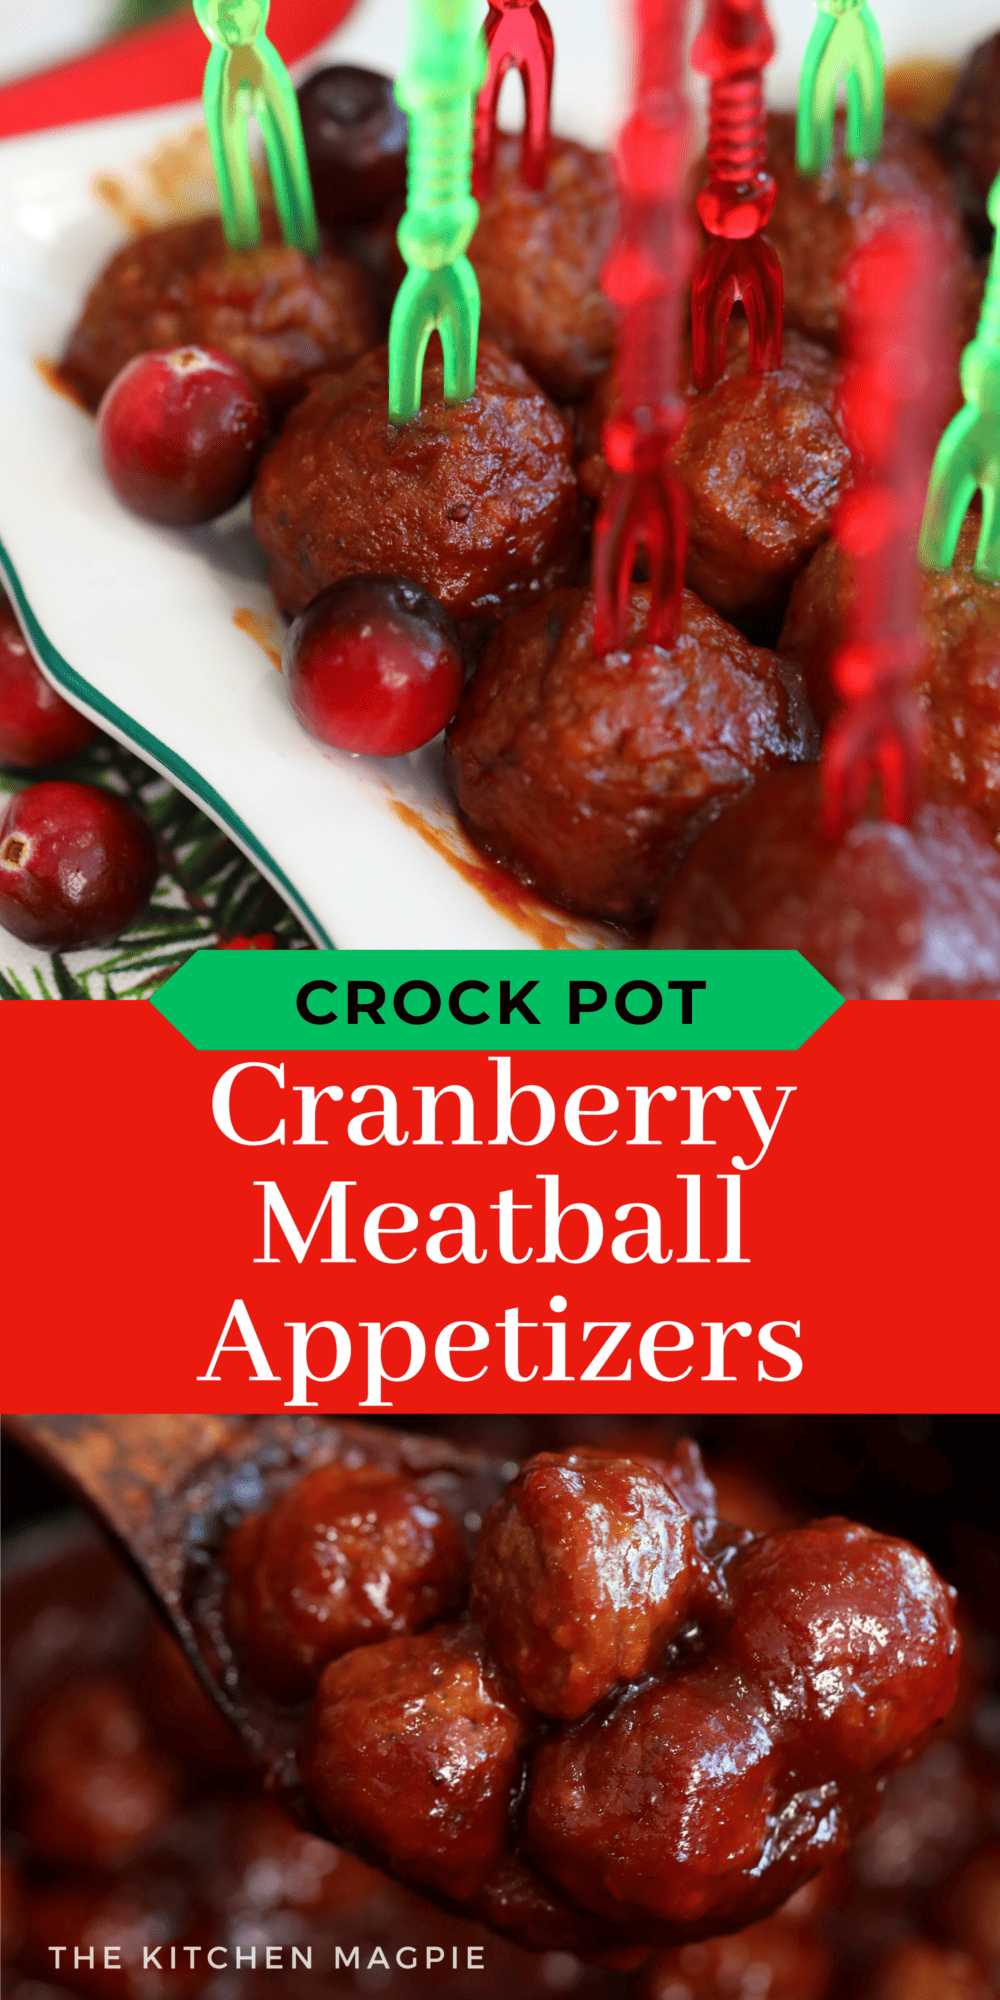 A quick homemade sauce makes these cranberry cocktail meatballs a party favorite! Heat them up in your slow cooker and serve to your guests when ready! 